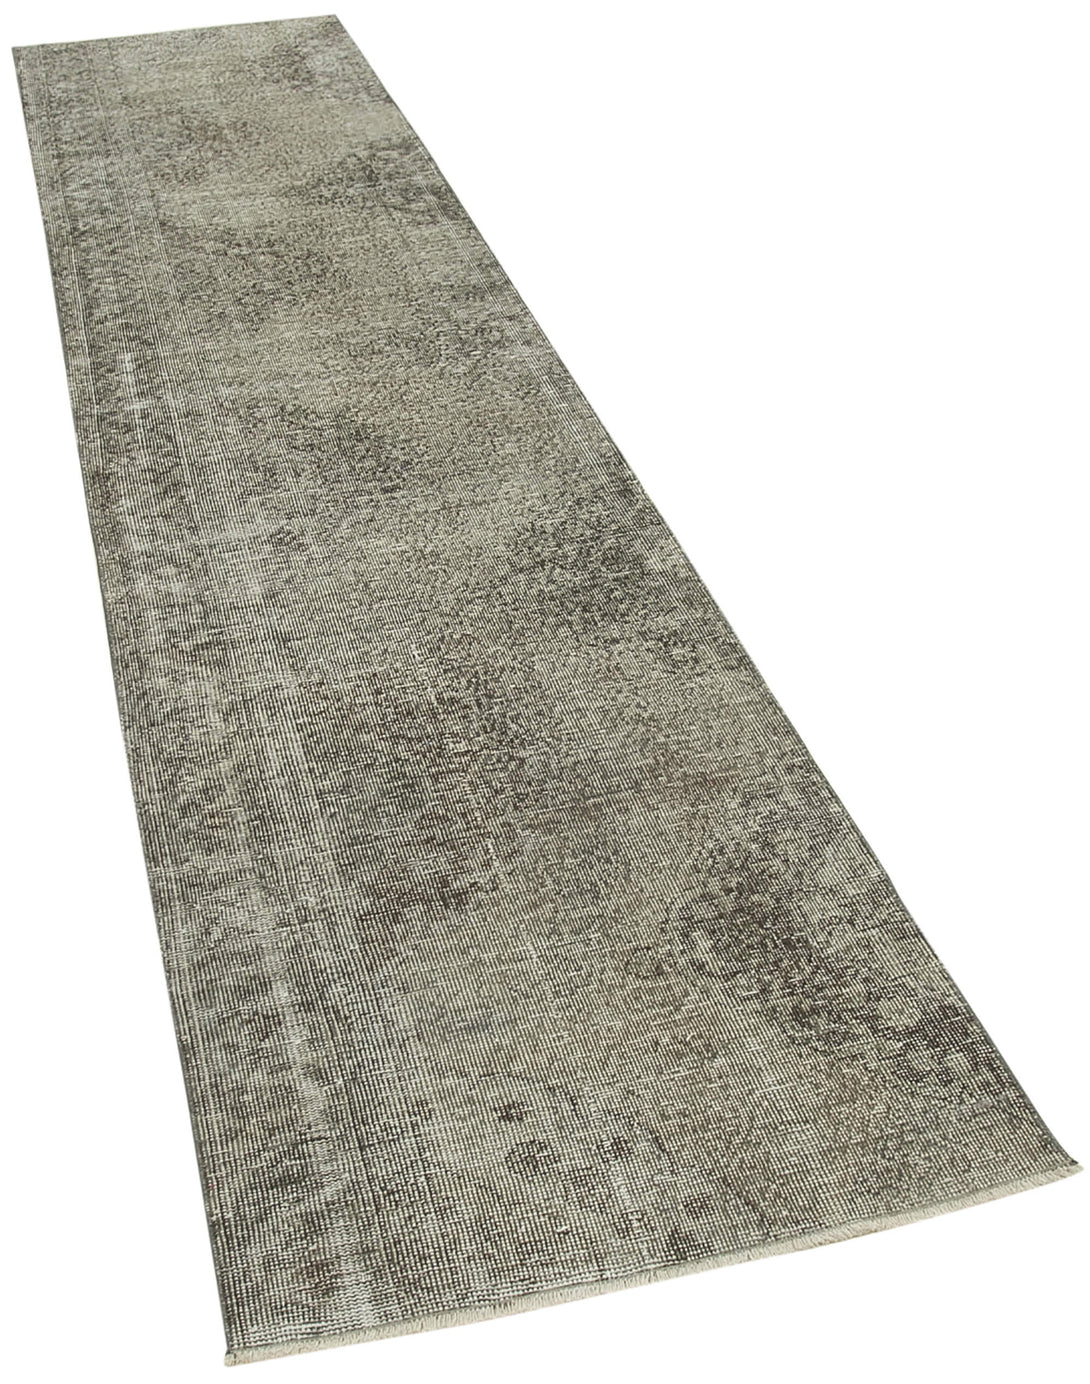 Handmade Overdyed Runner > Design# OL-AC-38240 > Size: 2'-6" x 11'-7", Carpet Culture Rugs, Handmade Rugs, NYC Rugs, New Rugs, Shop Rugs, Rug Store, Outlet Rugs, SoHo Rugs, Rugs in USA